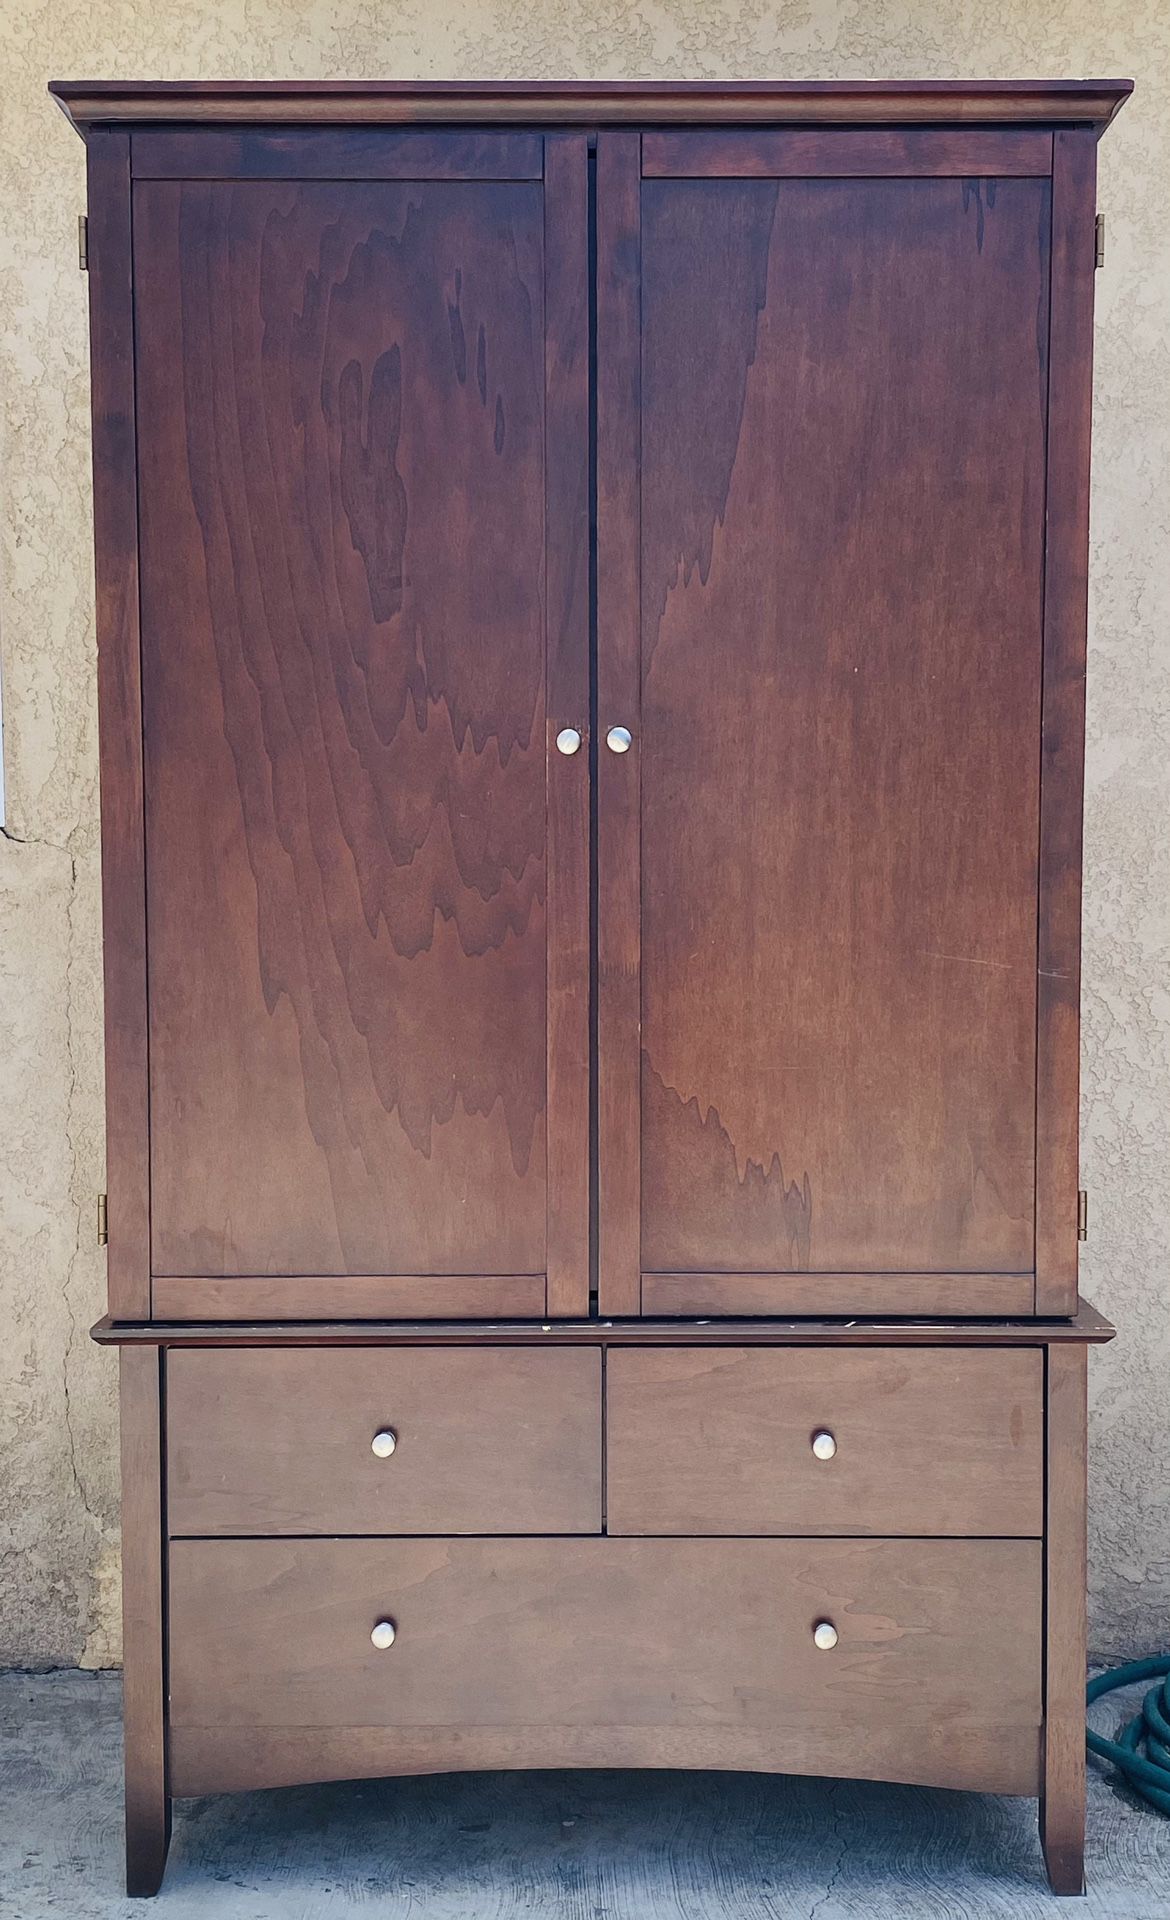 TV Armoire “FREE”…..come get It….